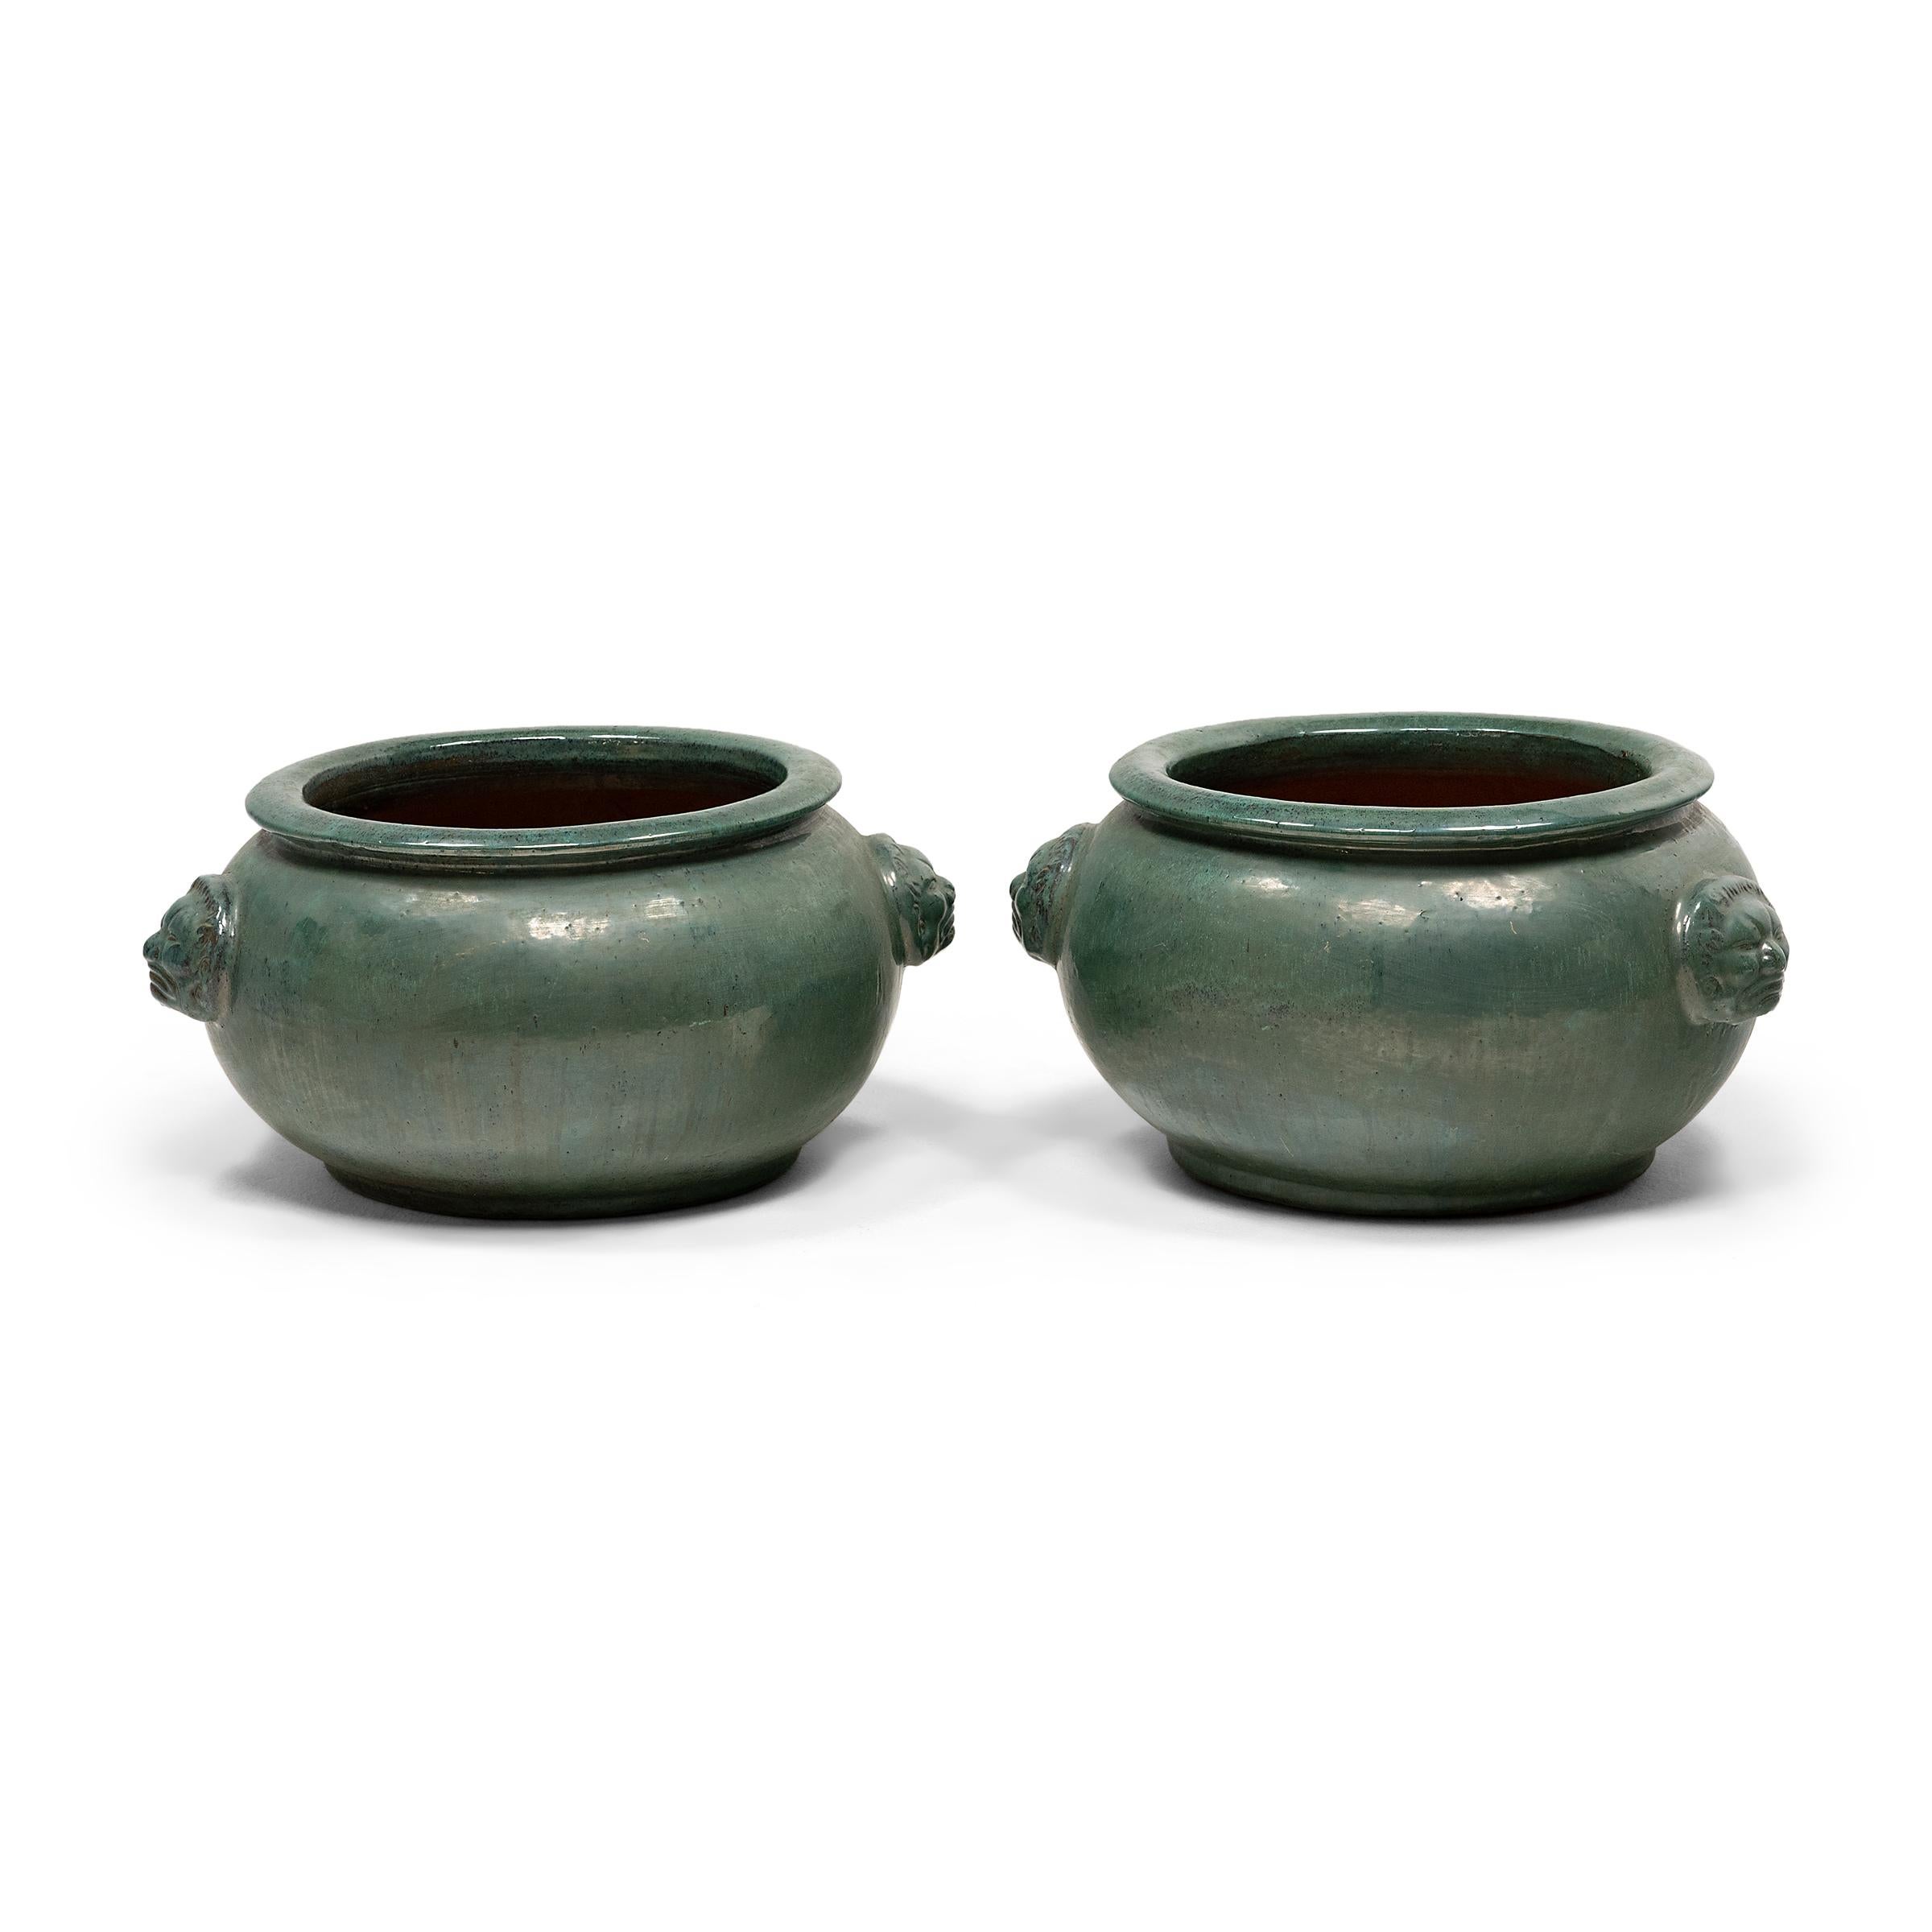 This pair of monumental ceramic pots is glazed with a thick turquoise pigment that lingers beautifully on every imperfection. The basin has a round and tapered form, with a wide mouth, flared rim, and two side handles shaped in the face of an